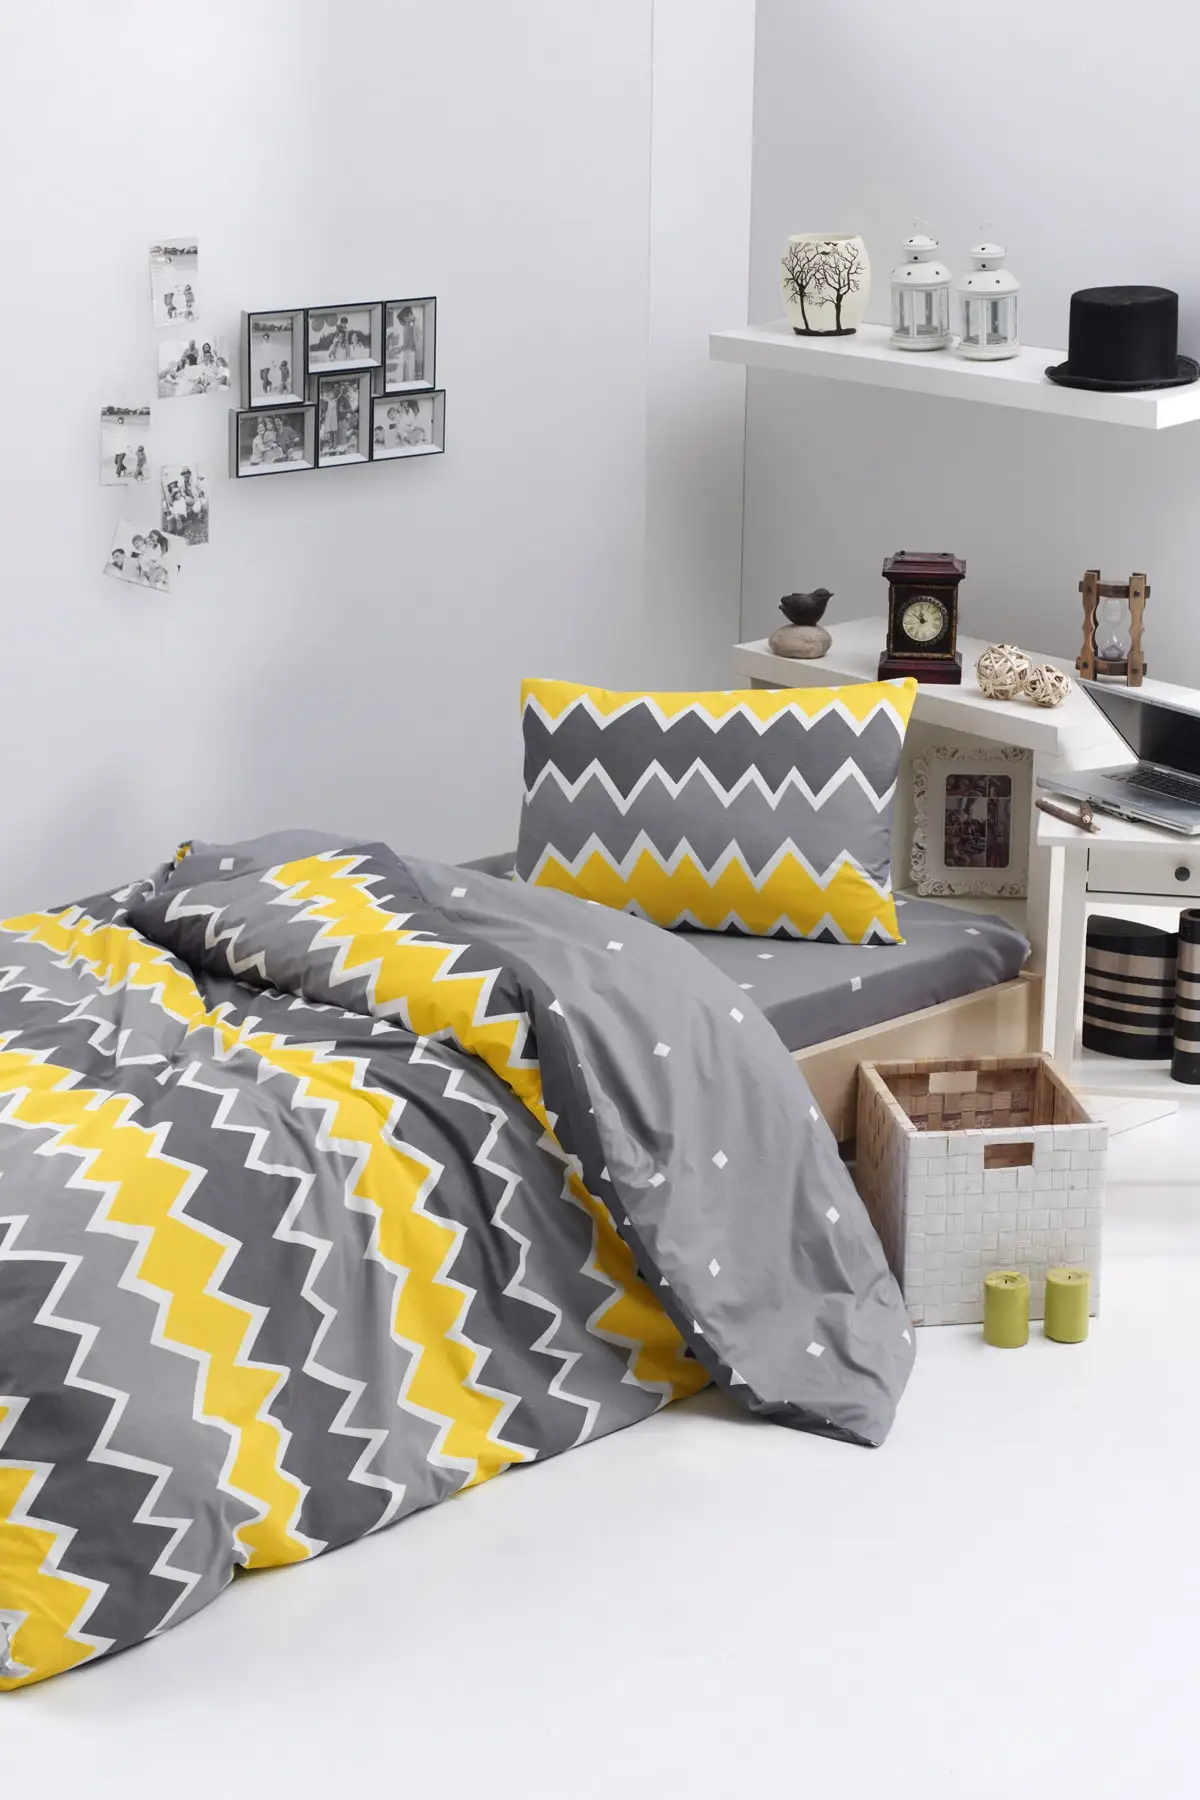 Bedding Set %100 Cotton With Pillowcase Duvet Cover Sets Linen Sheet Yellow Single Full Size Quilt Covers Bedclothes Modern Cute